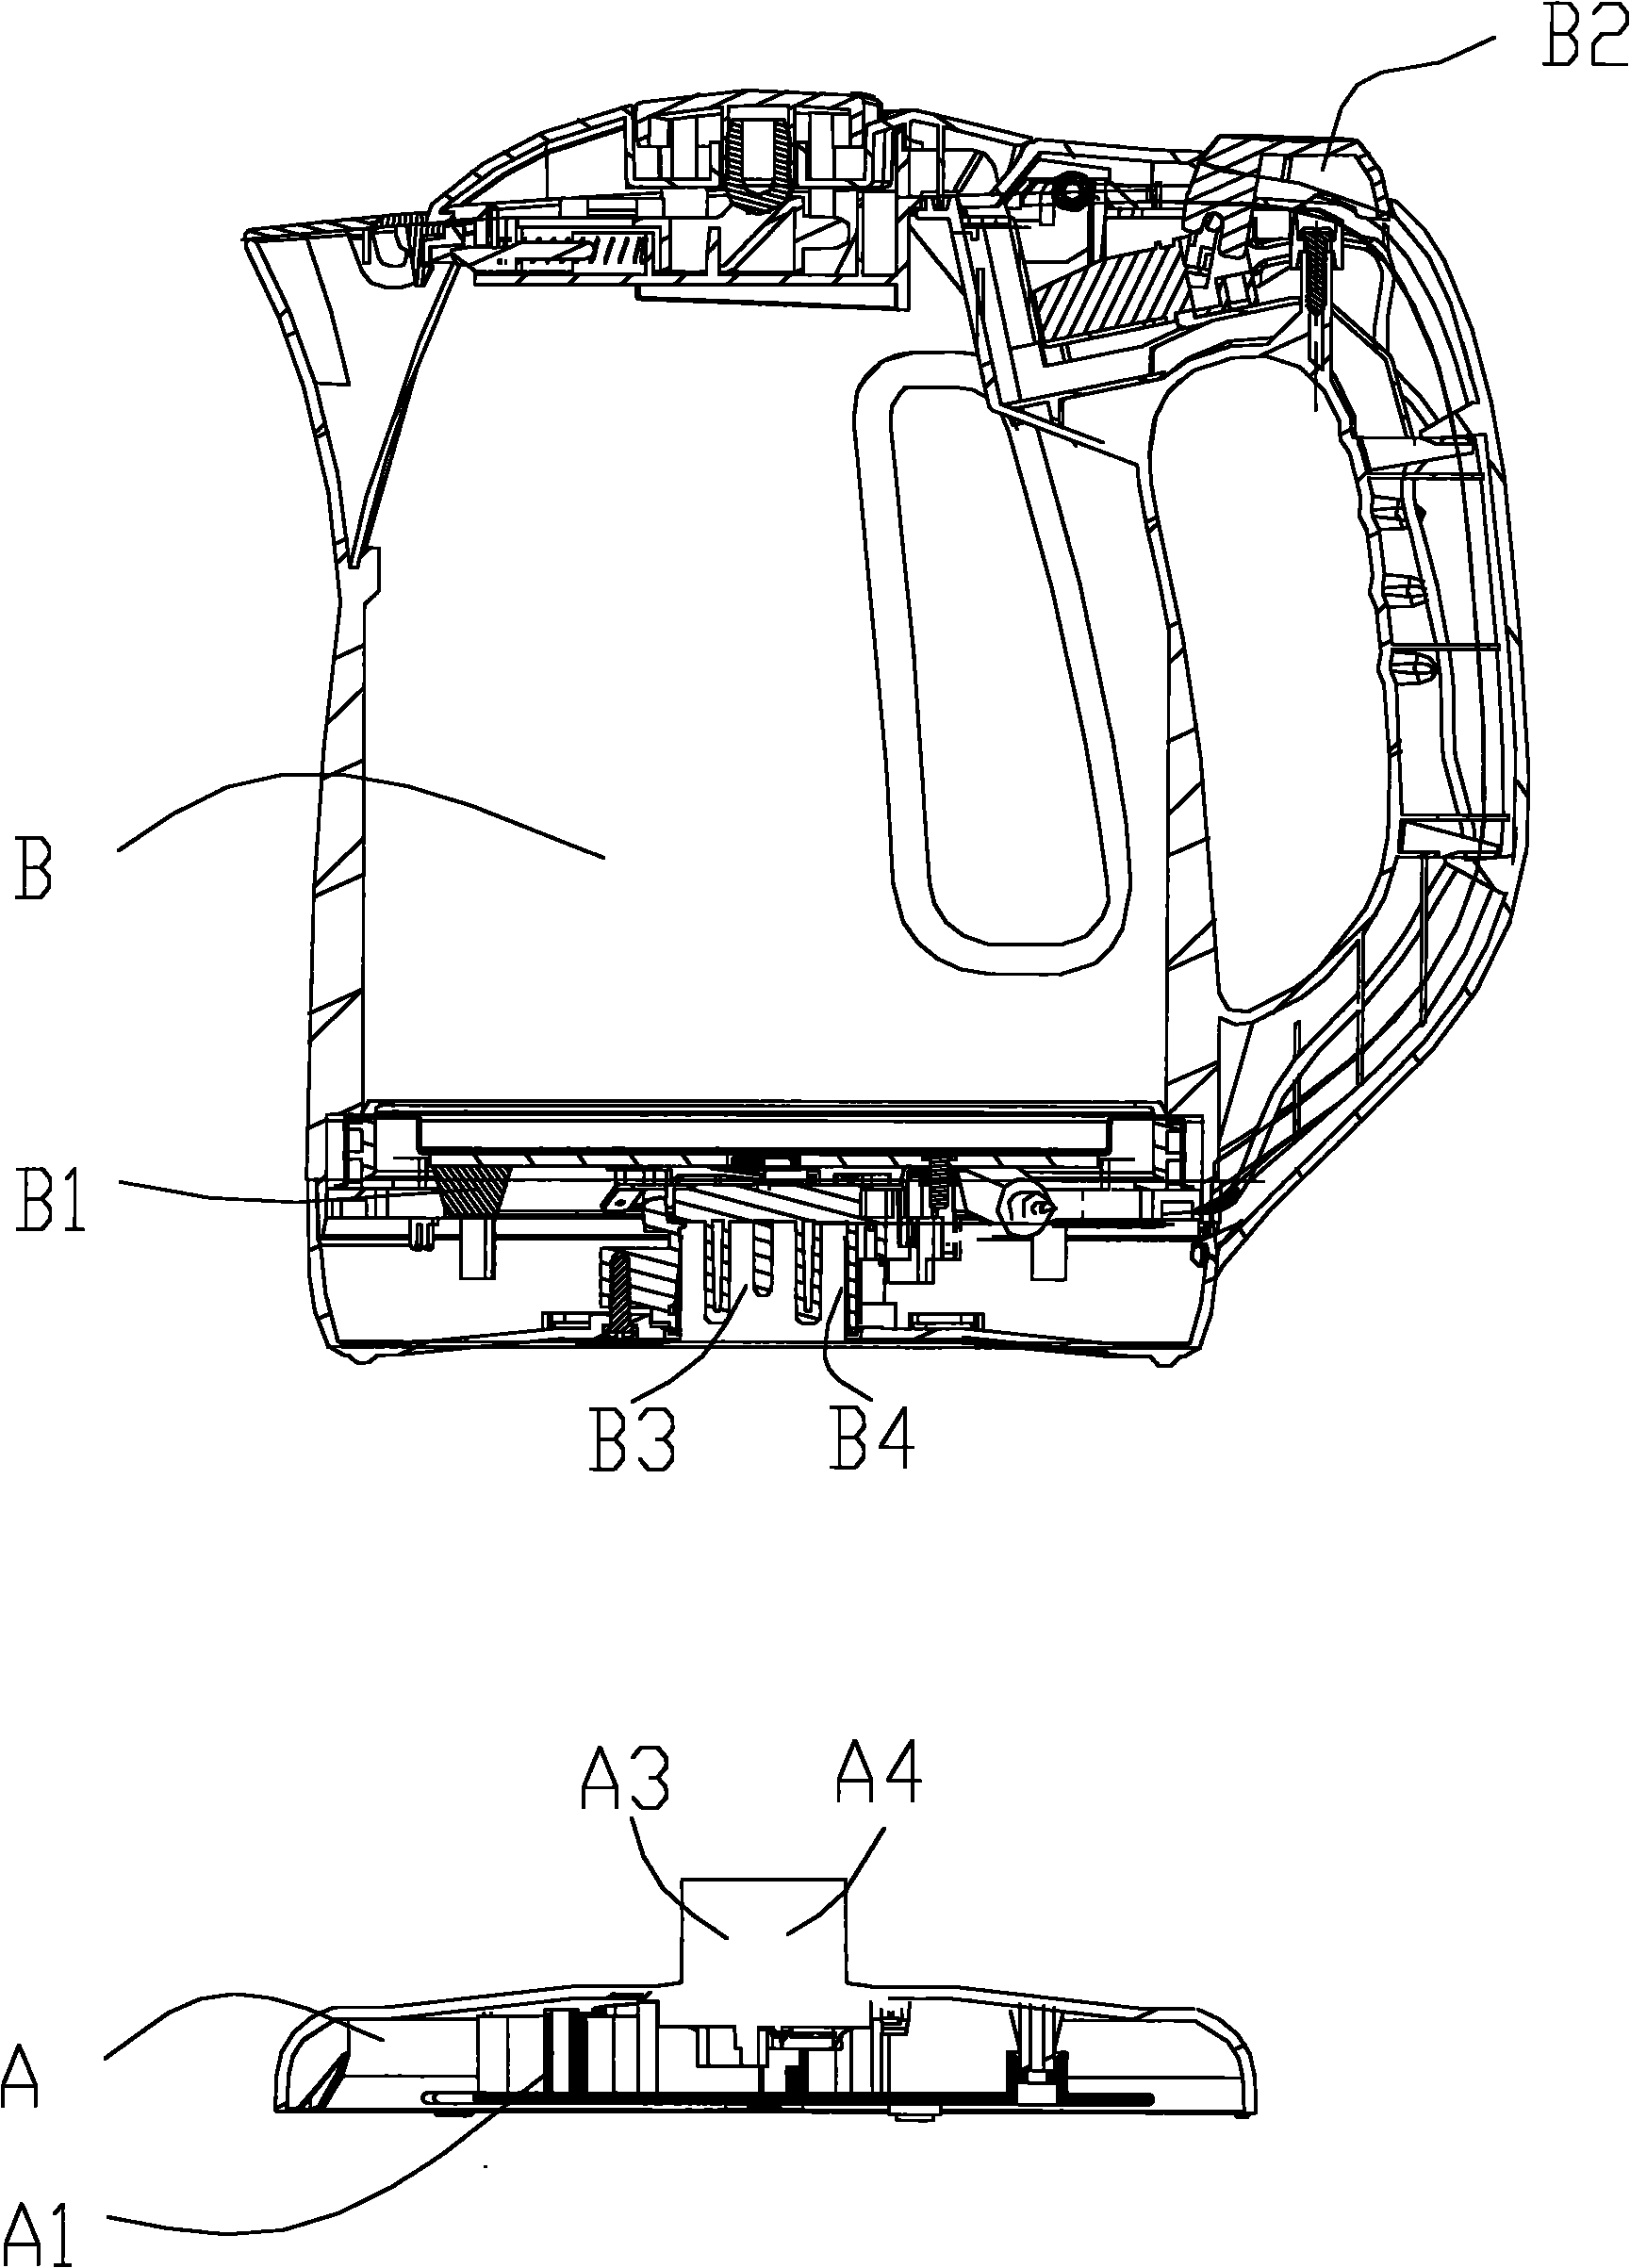 Electric connection device of base and main body